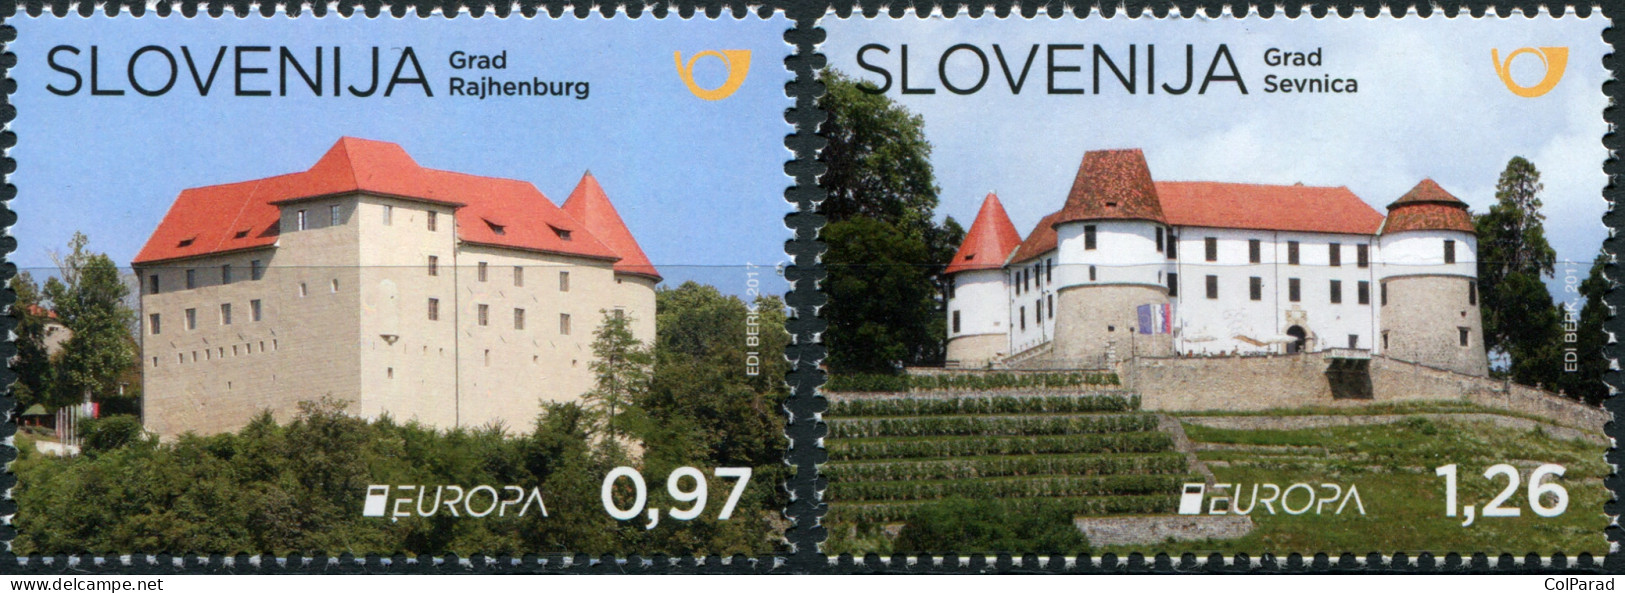 SLOVENIA - 2017 - SET OF 2 STAMPS MNH ** - EUROPA Stamps - Palaces And Castles - Eslovenia